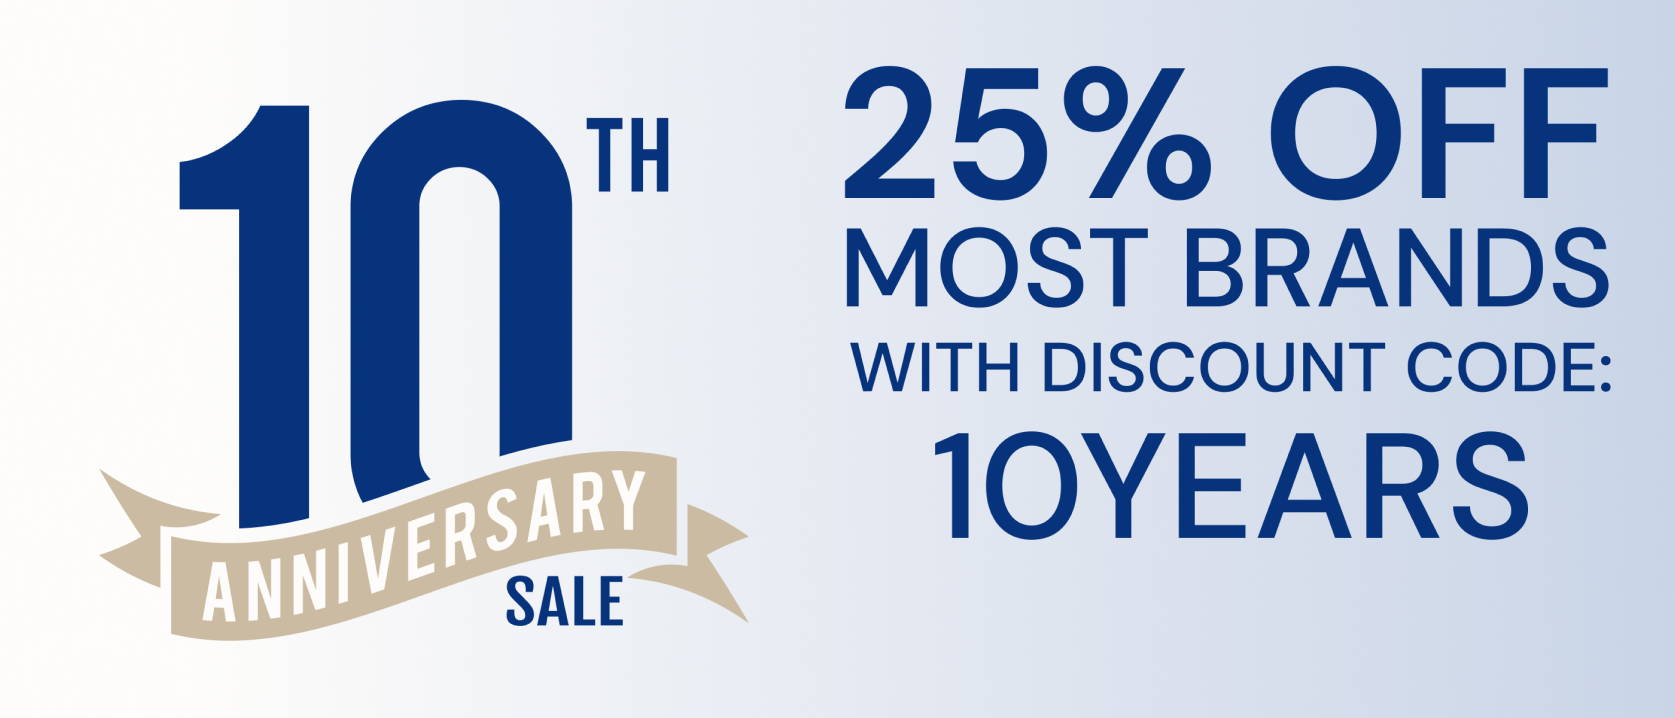 10th Anniversary Sale logo against a pale blue background with the text 25% off most brands with discount code 10YEARS